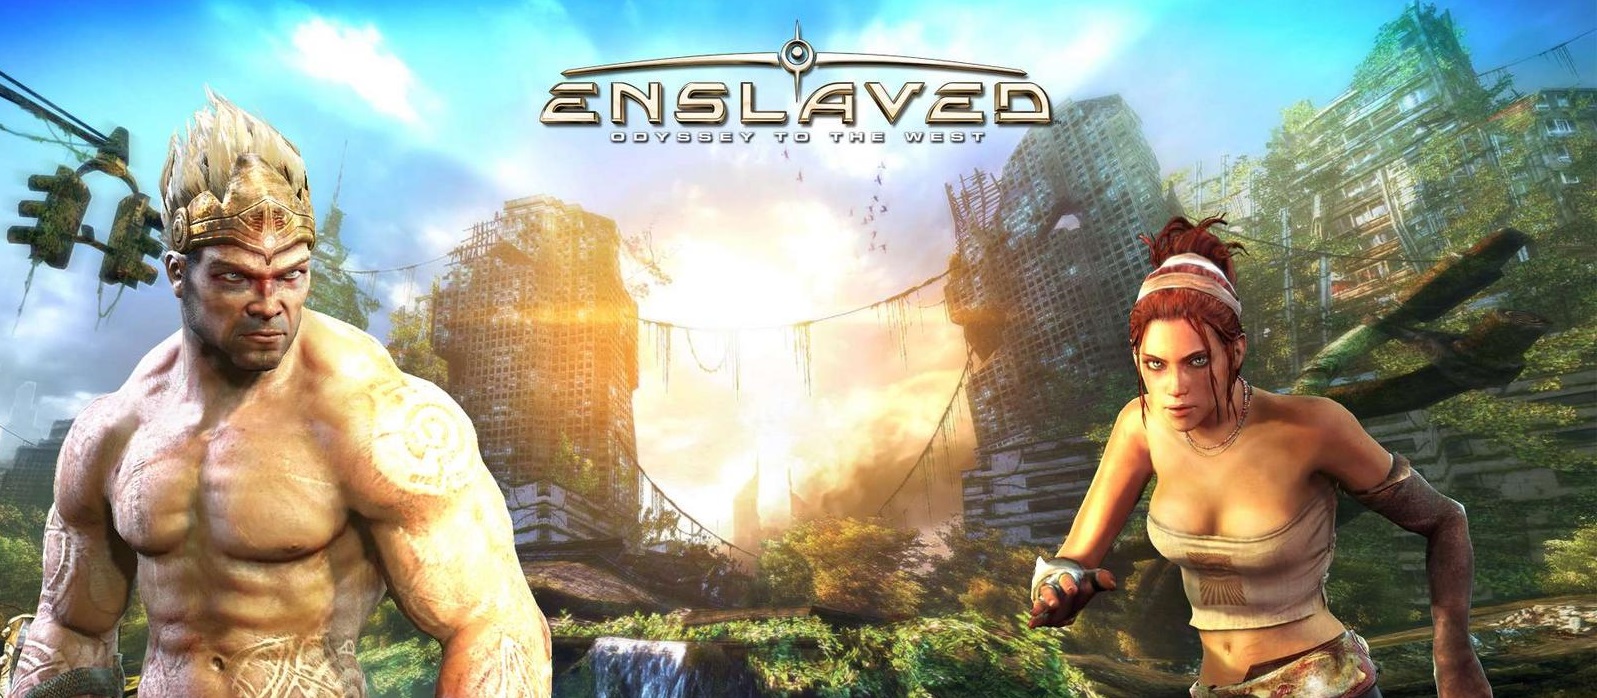 Enslaved: Odyssey To The West